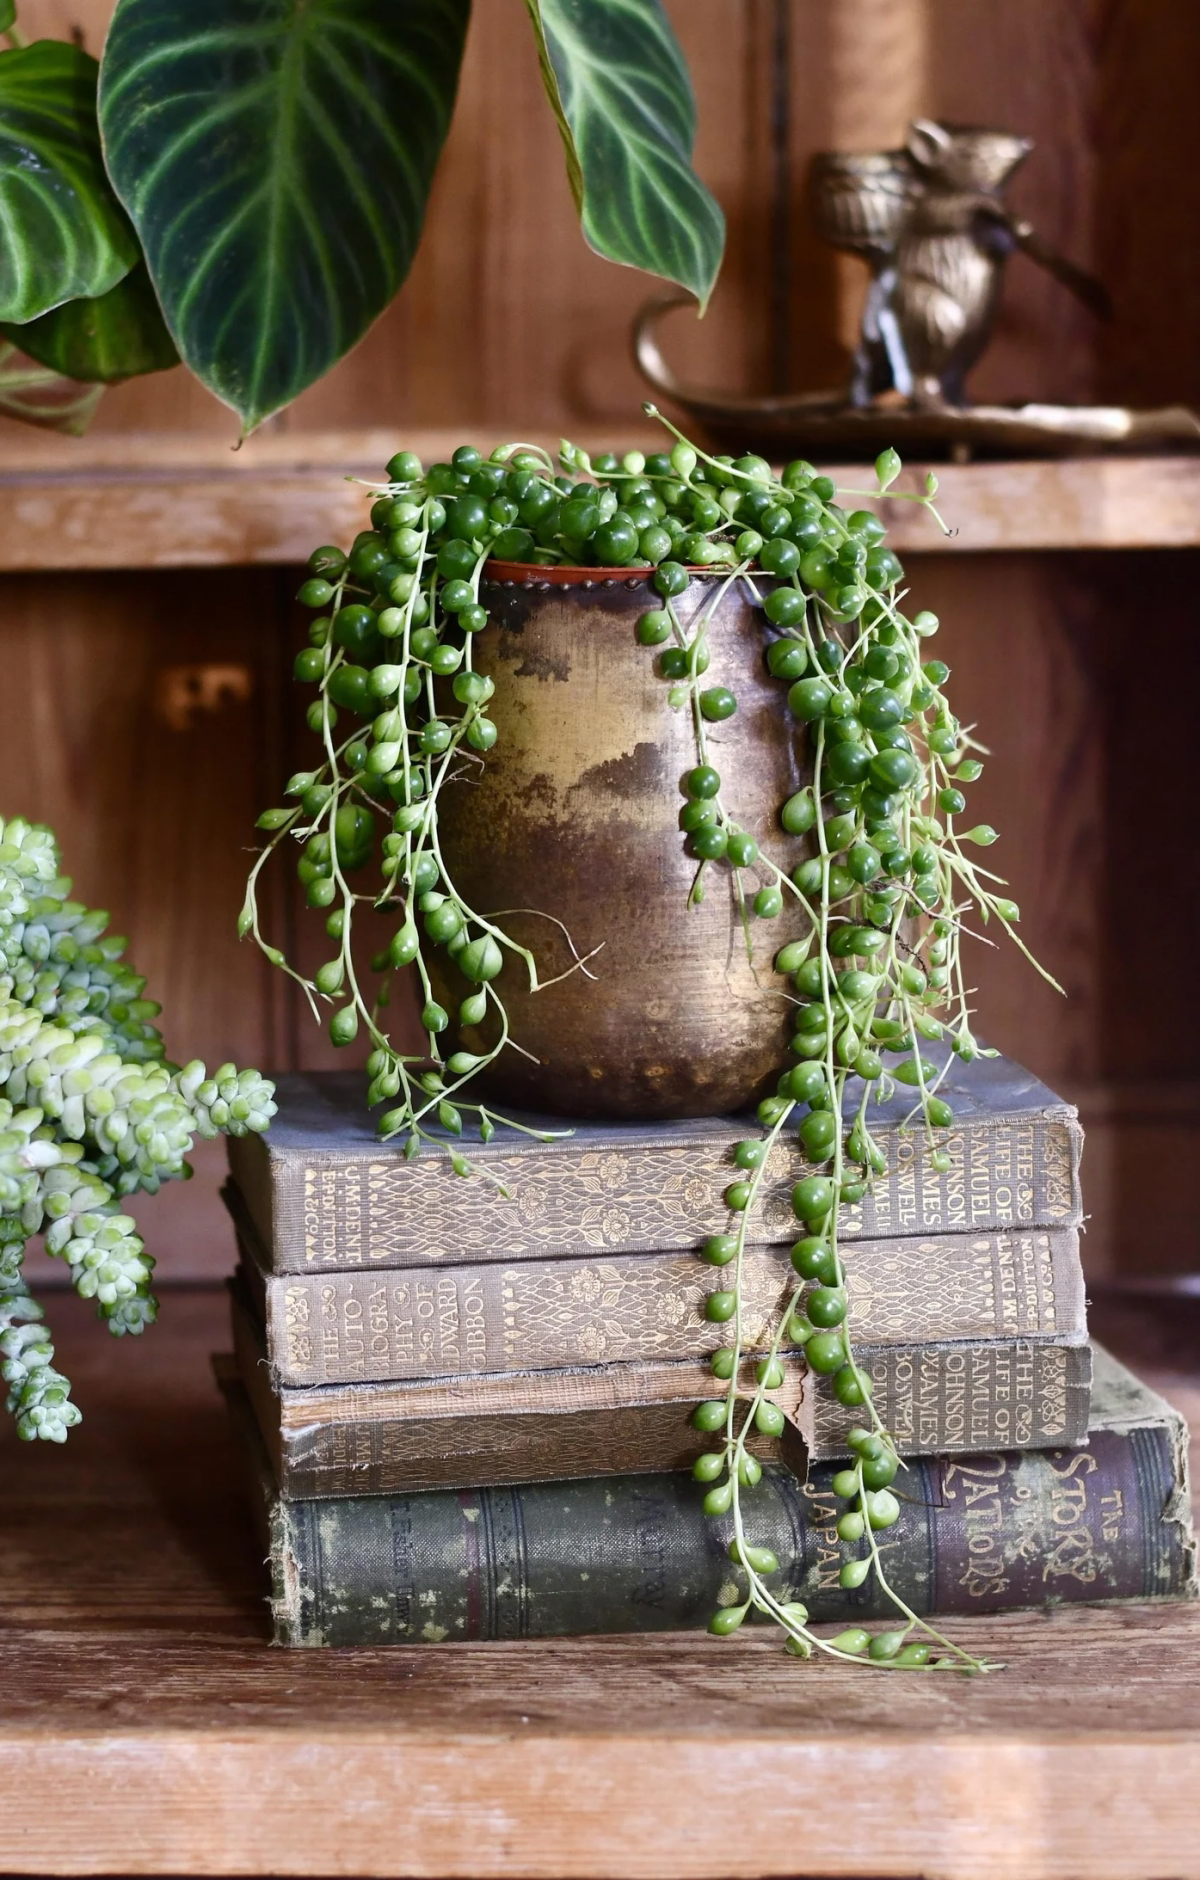 how to care for string of pearls